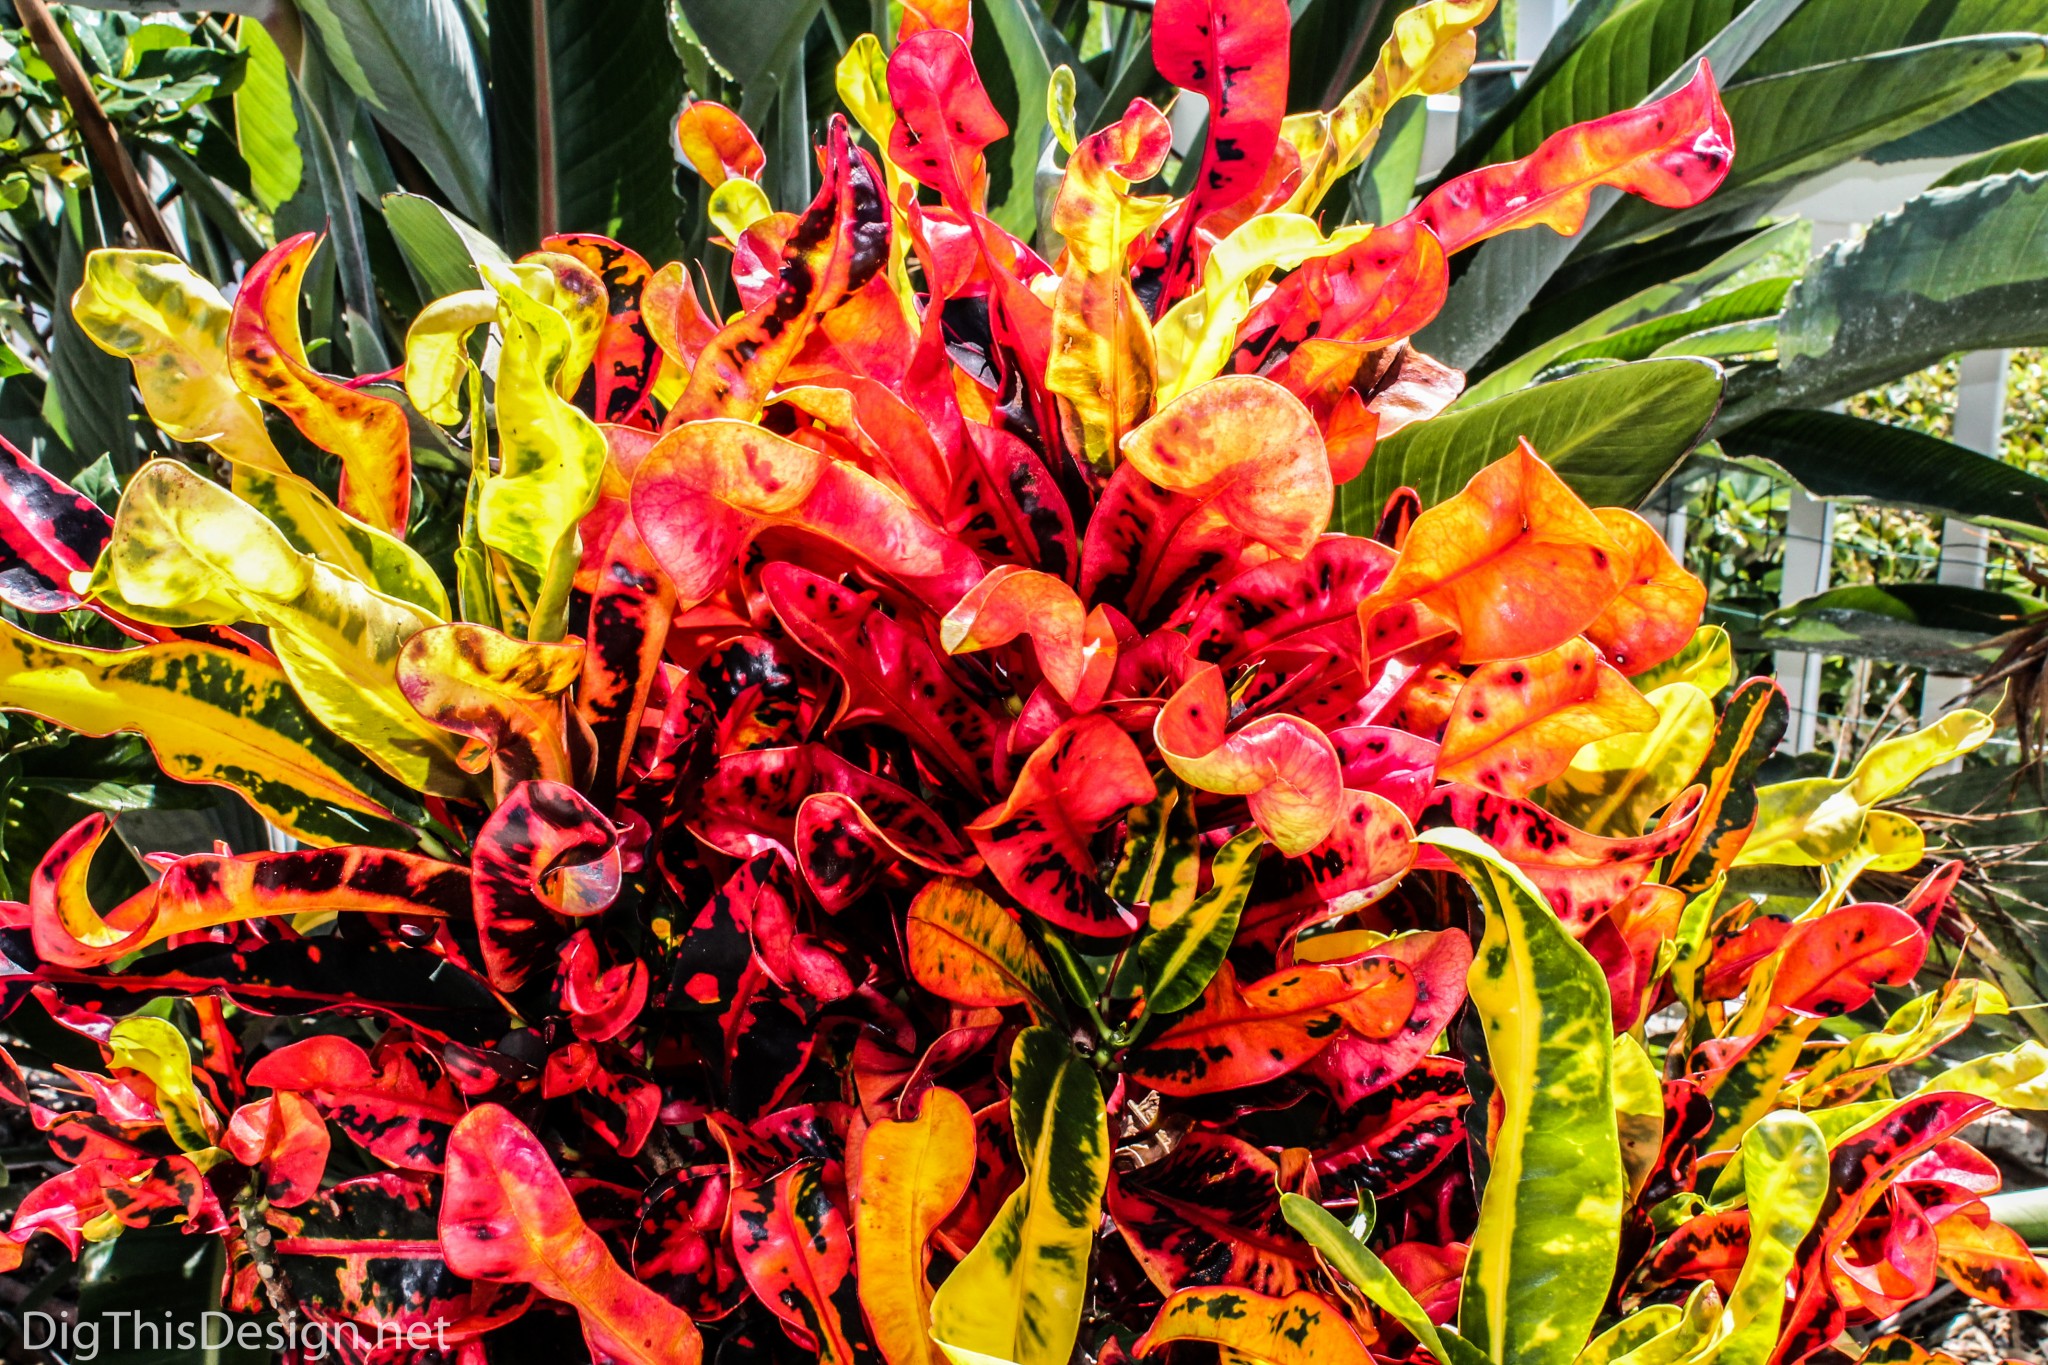 Crotons are a plant with vibrant shades of orange.